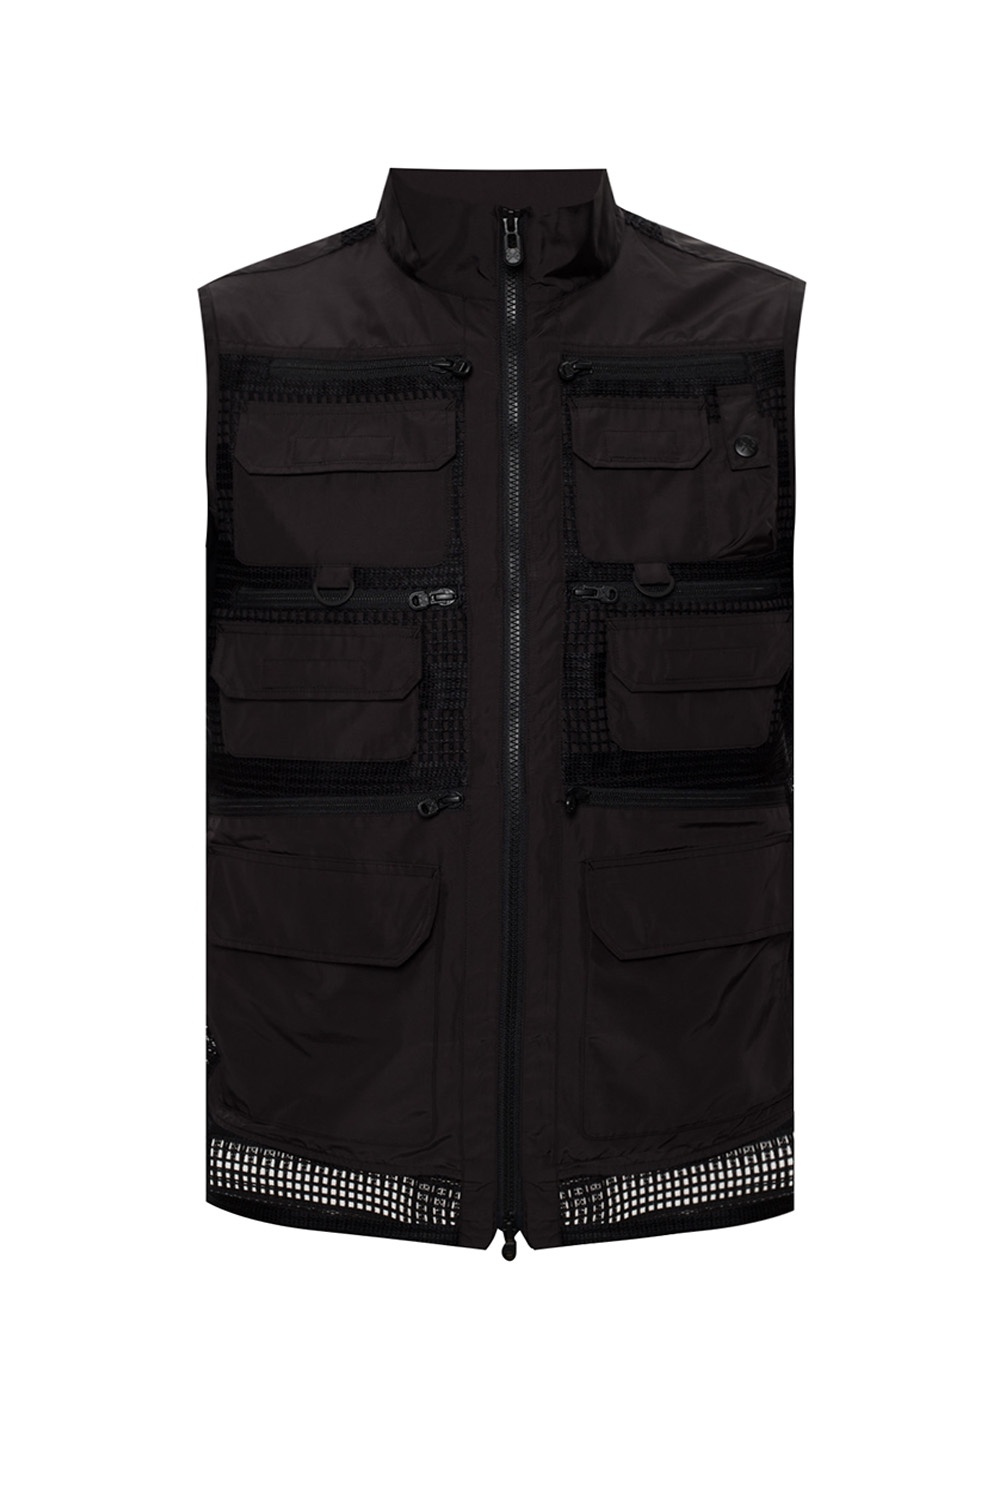 White Mountaineering Vest with pockets | Men's Clothing | Vitkac